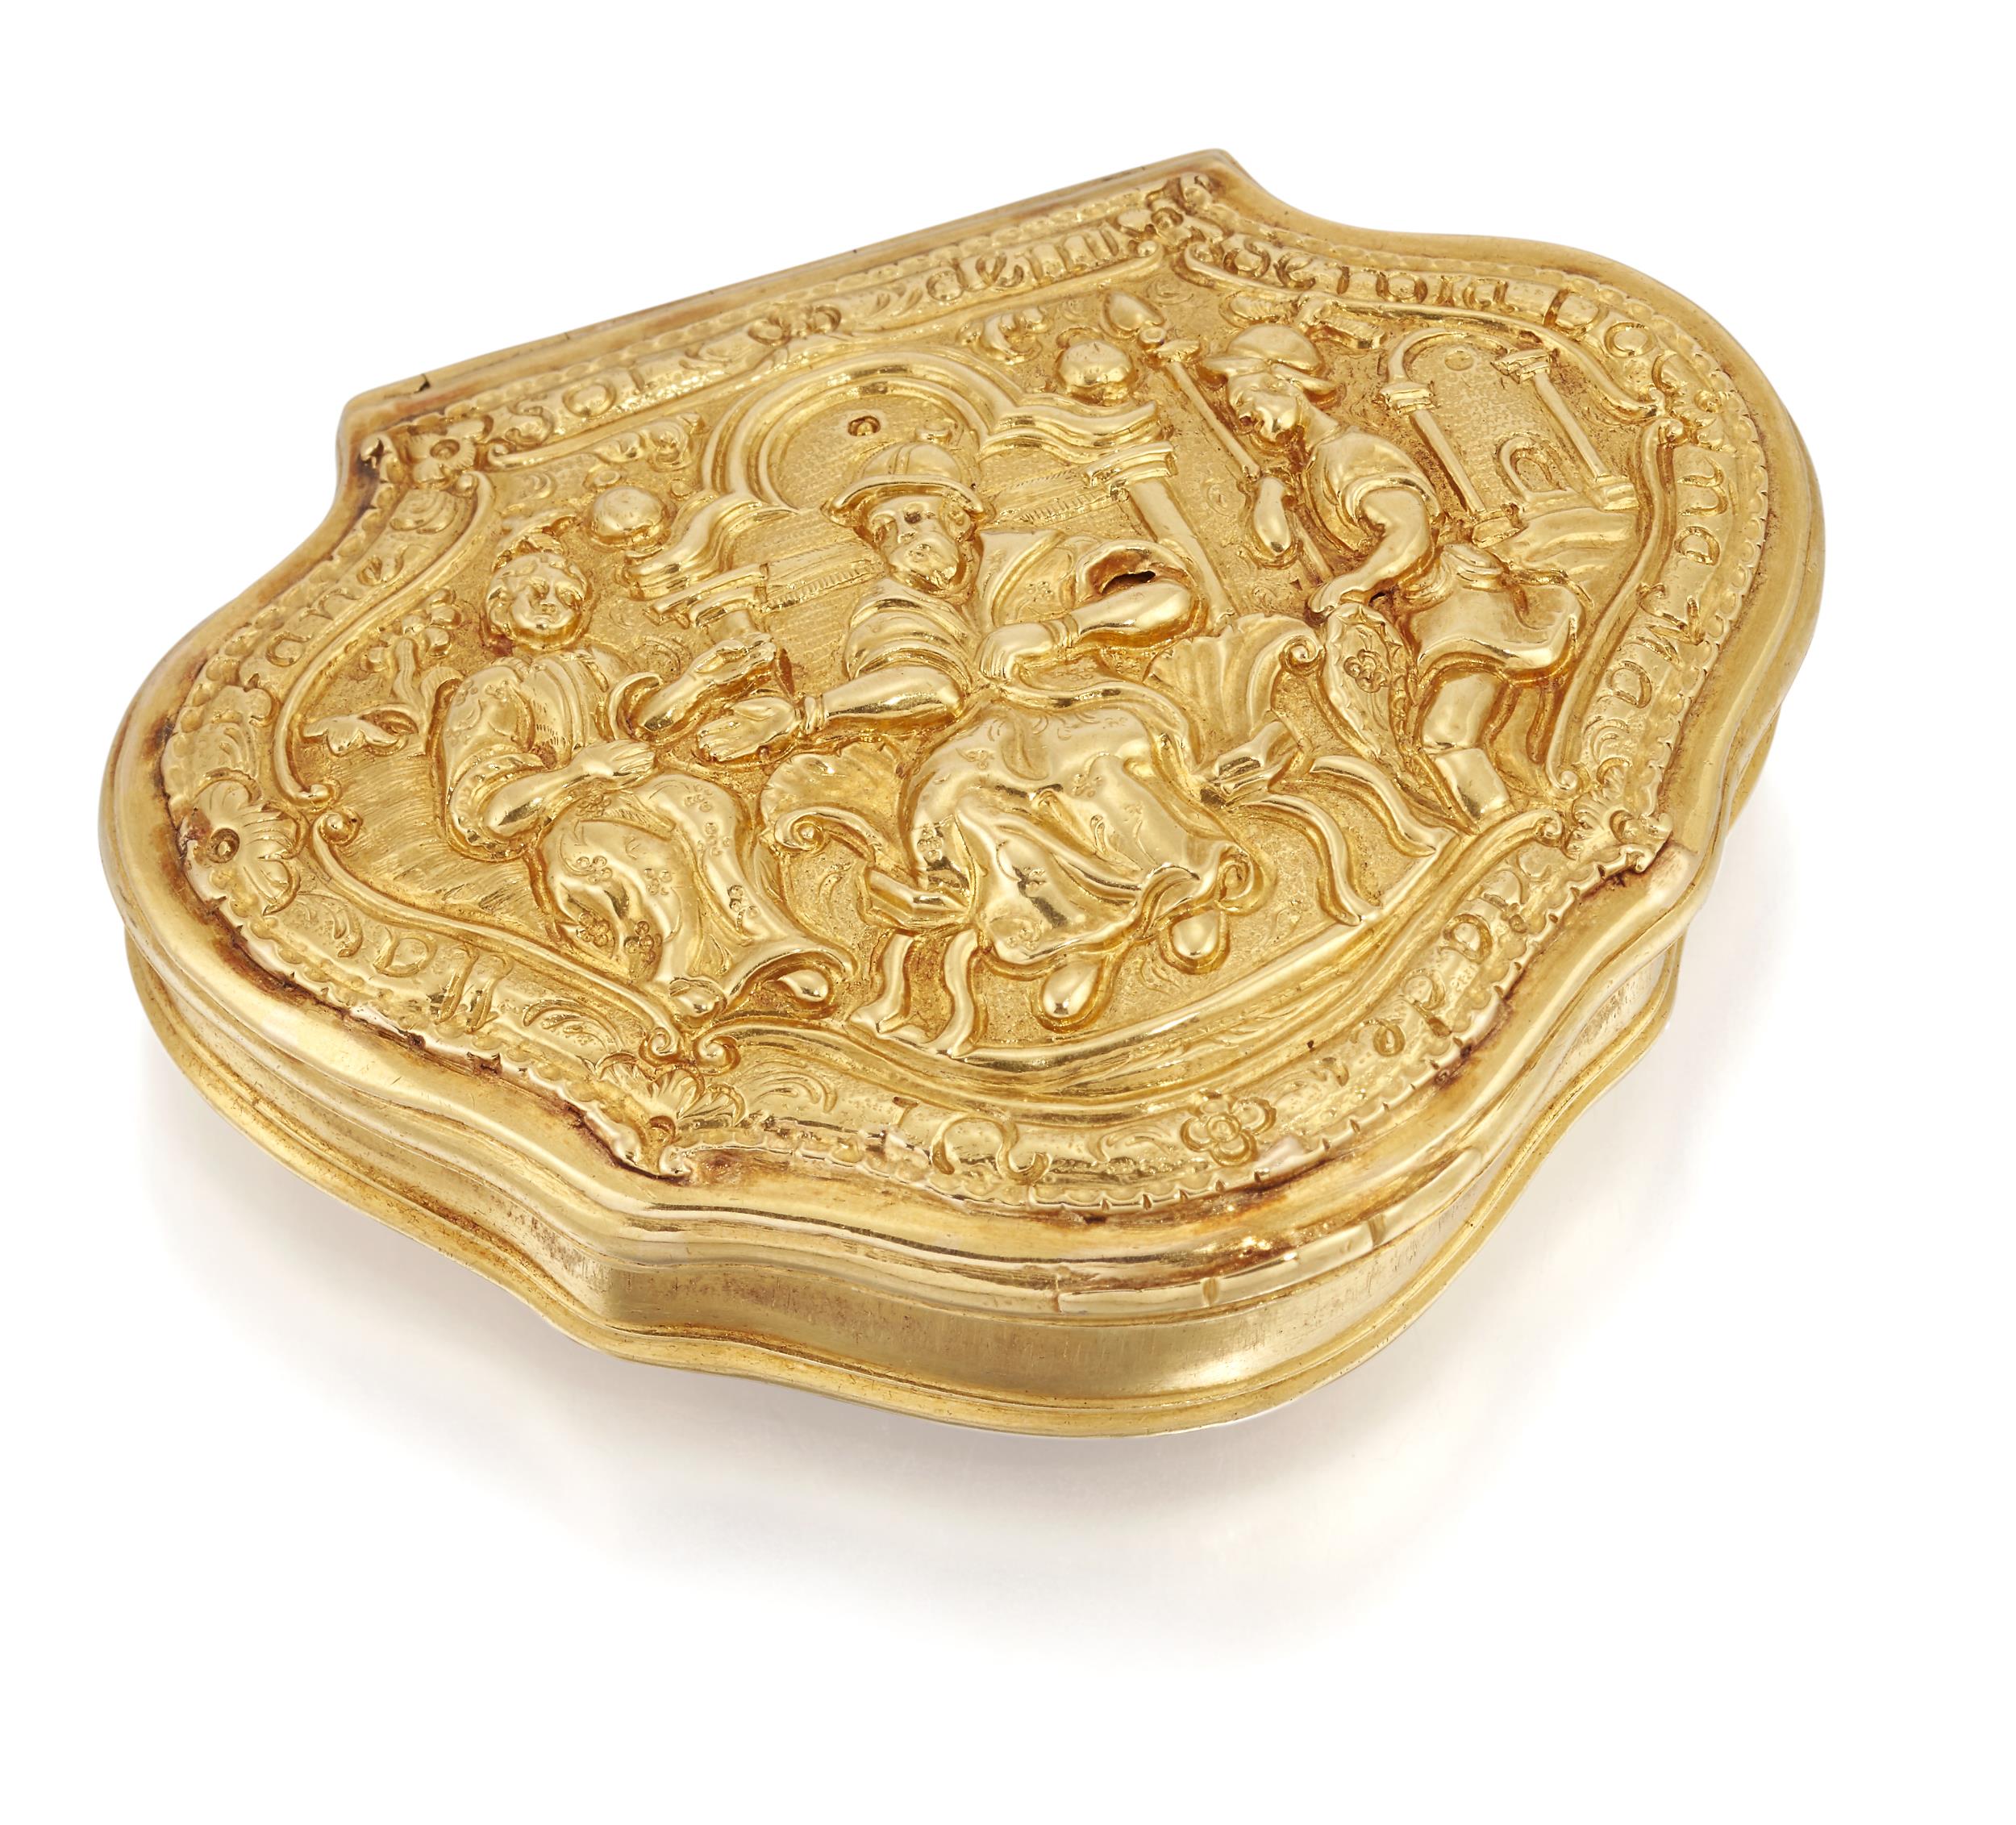 A GEORGE II GOLD SNUFF BOX, APPARENTLY UNMARKED, CIRCA 1740 - Image 2 of 4